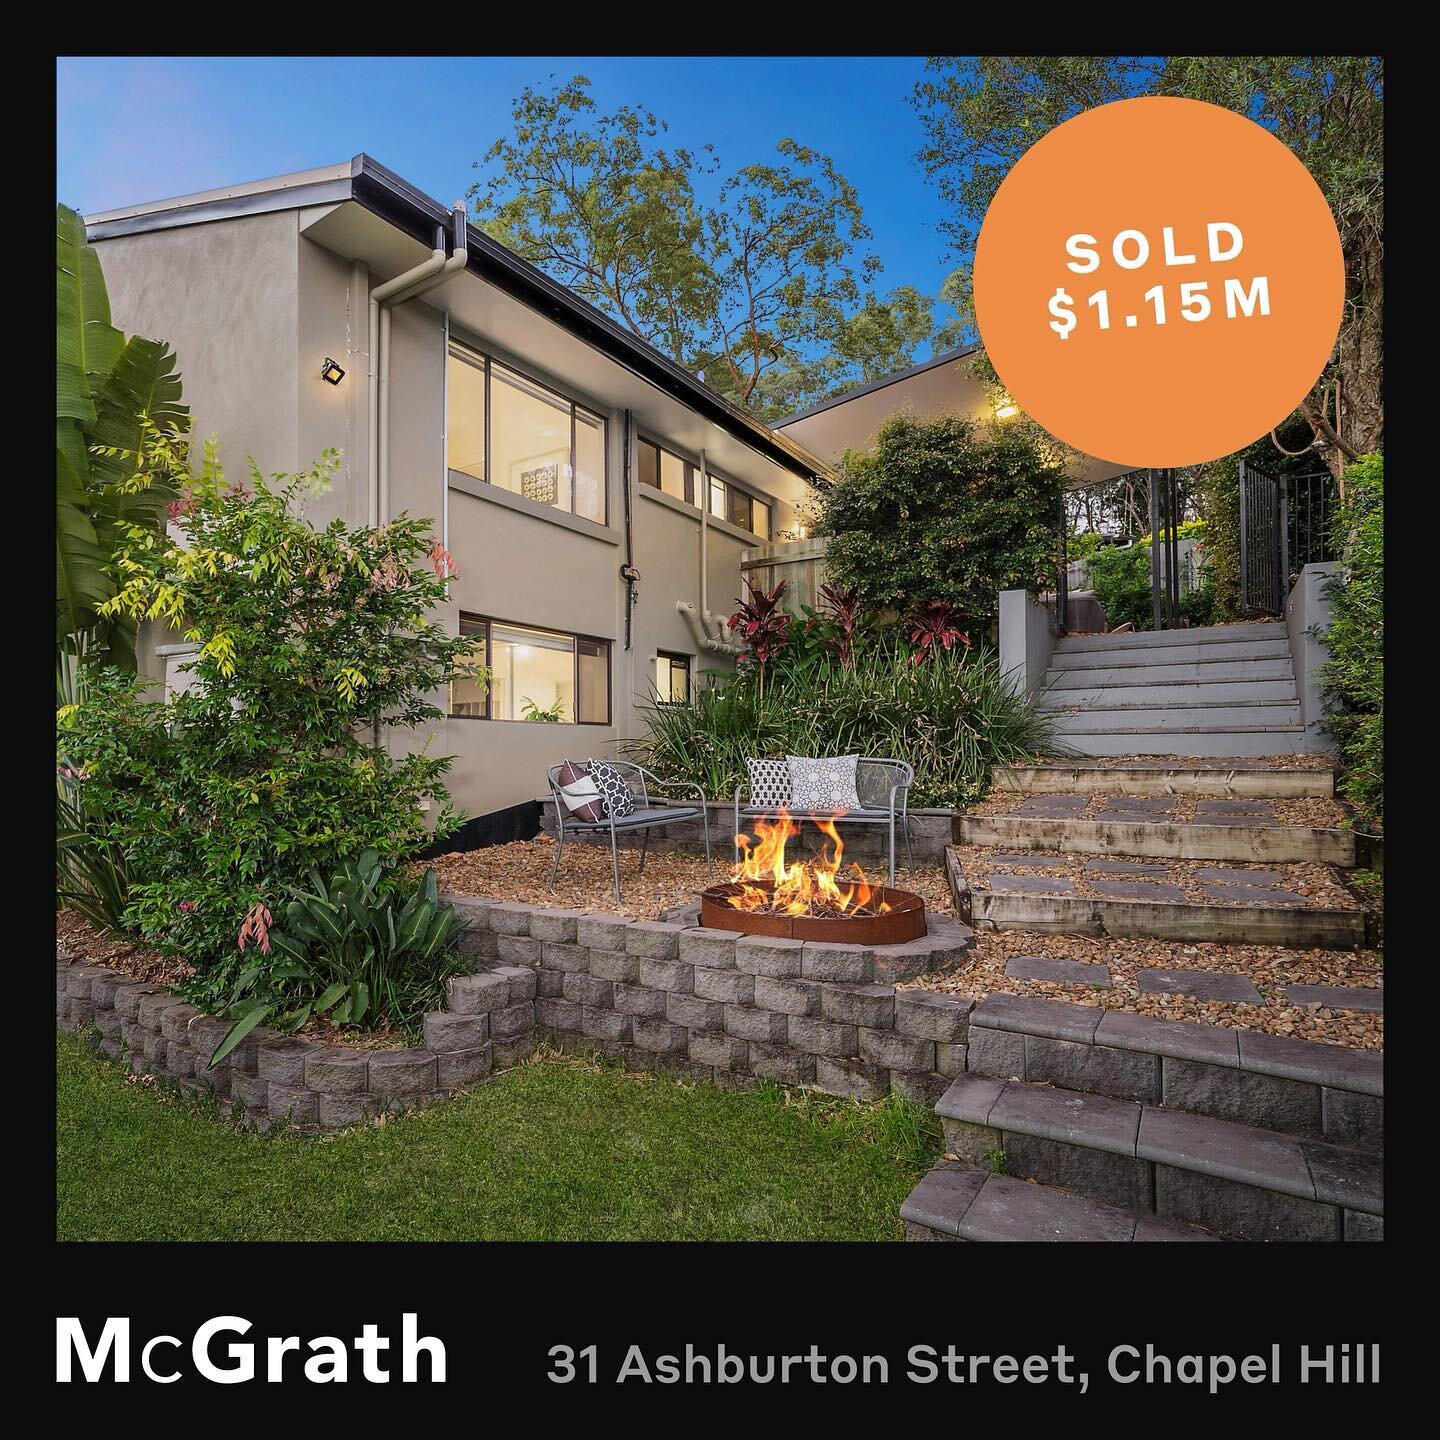 J U S T  S O L D 
31 Ashburton Street, Chapel Hill

A great result secured for this beautiful family home in just a few days, following multiple offers. A new street, and precinct record for this deserving property, following fierce competition.

Con